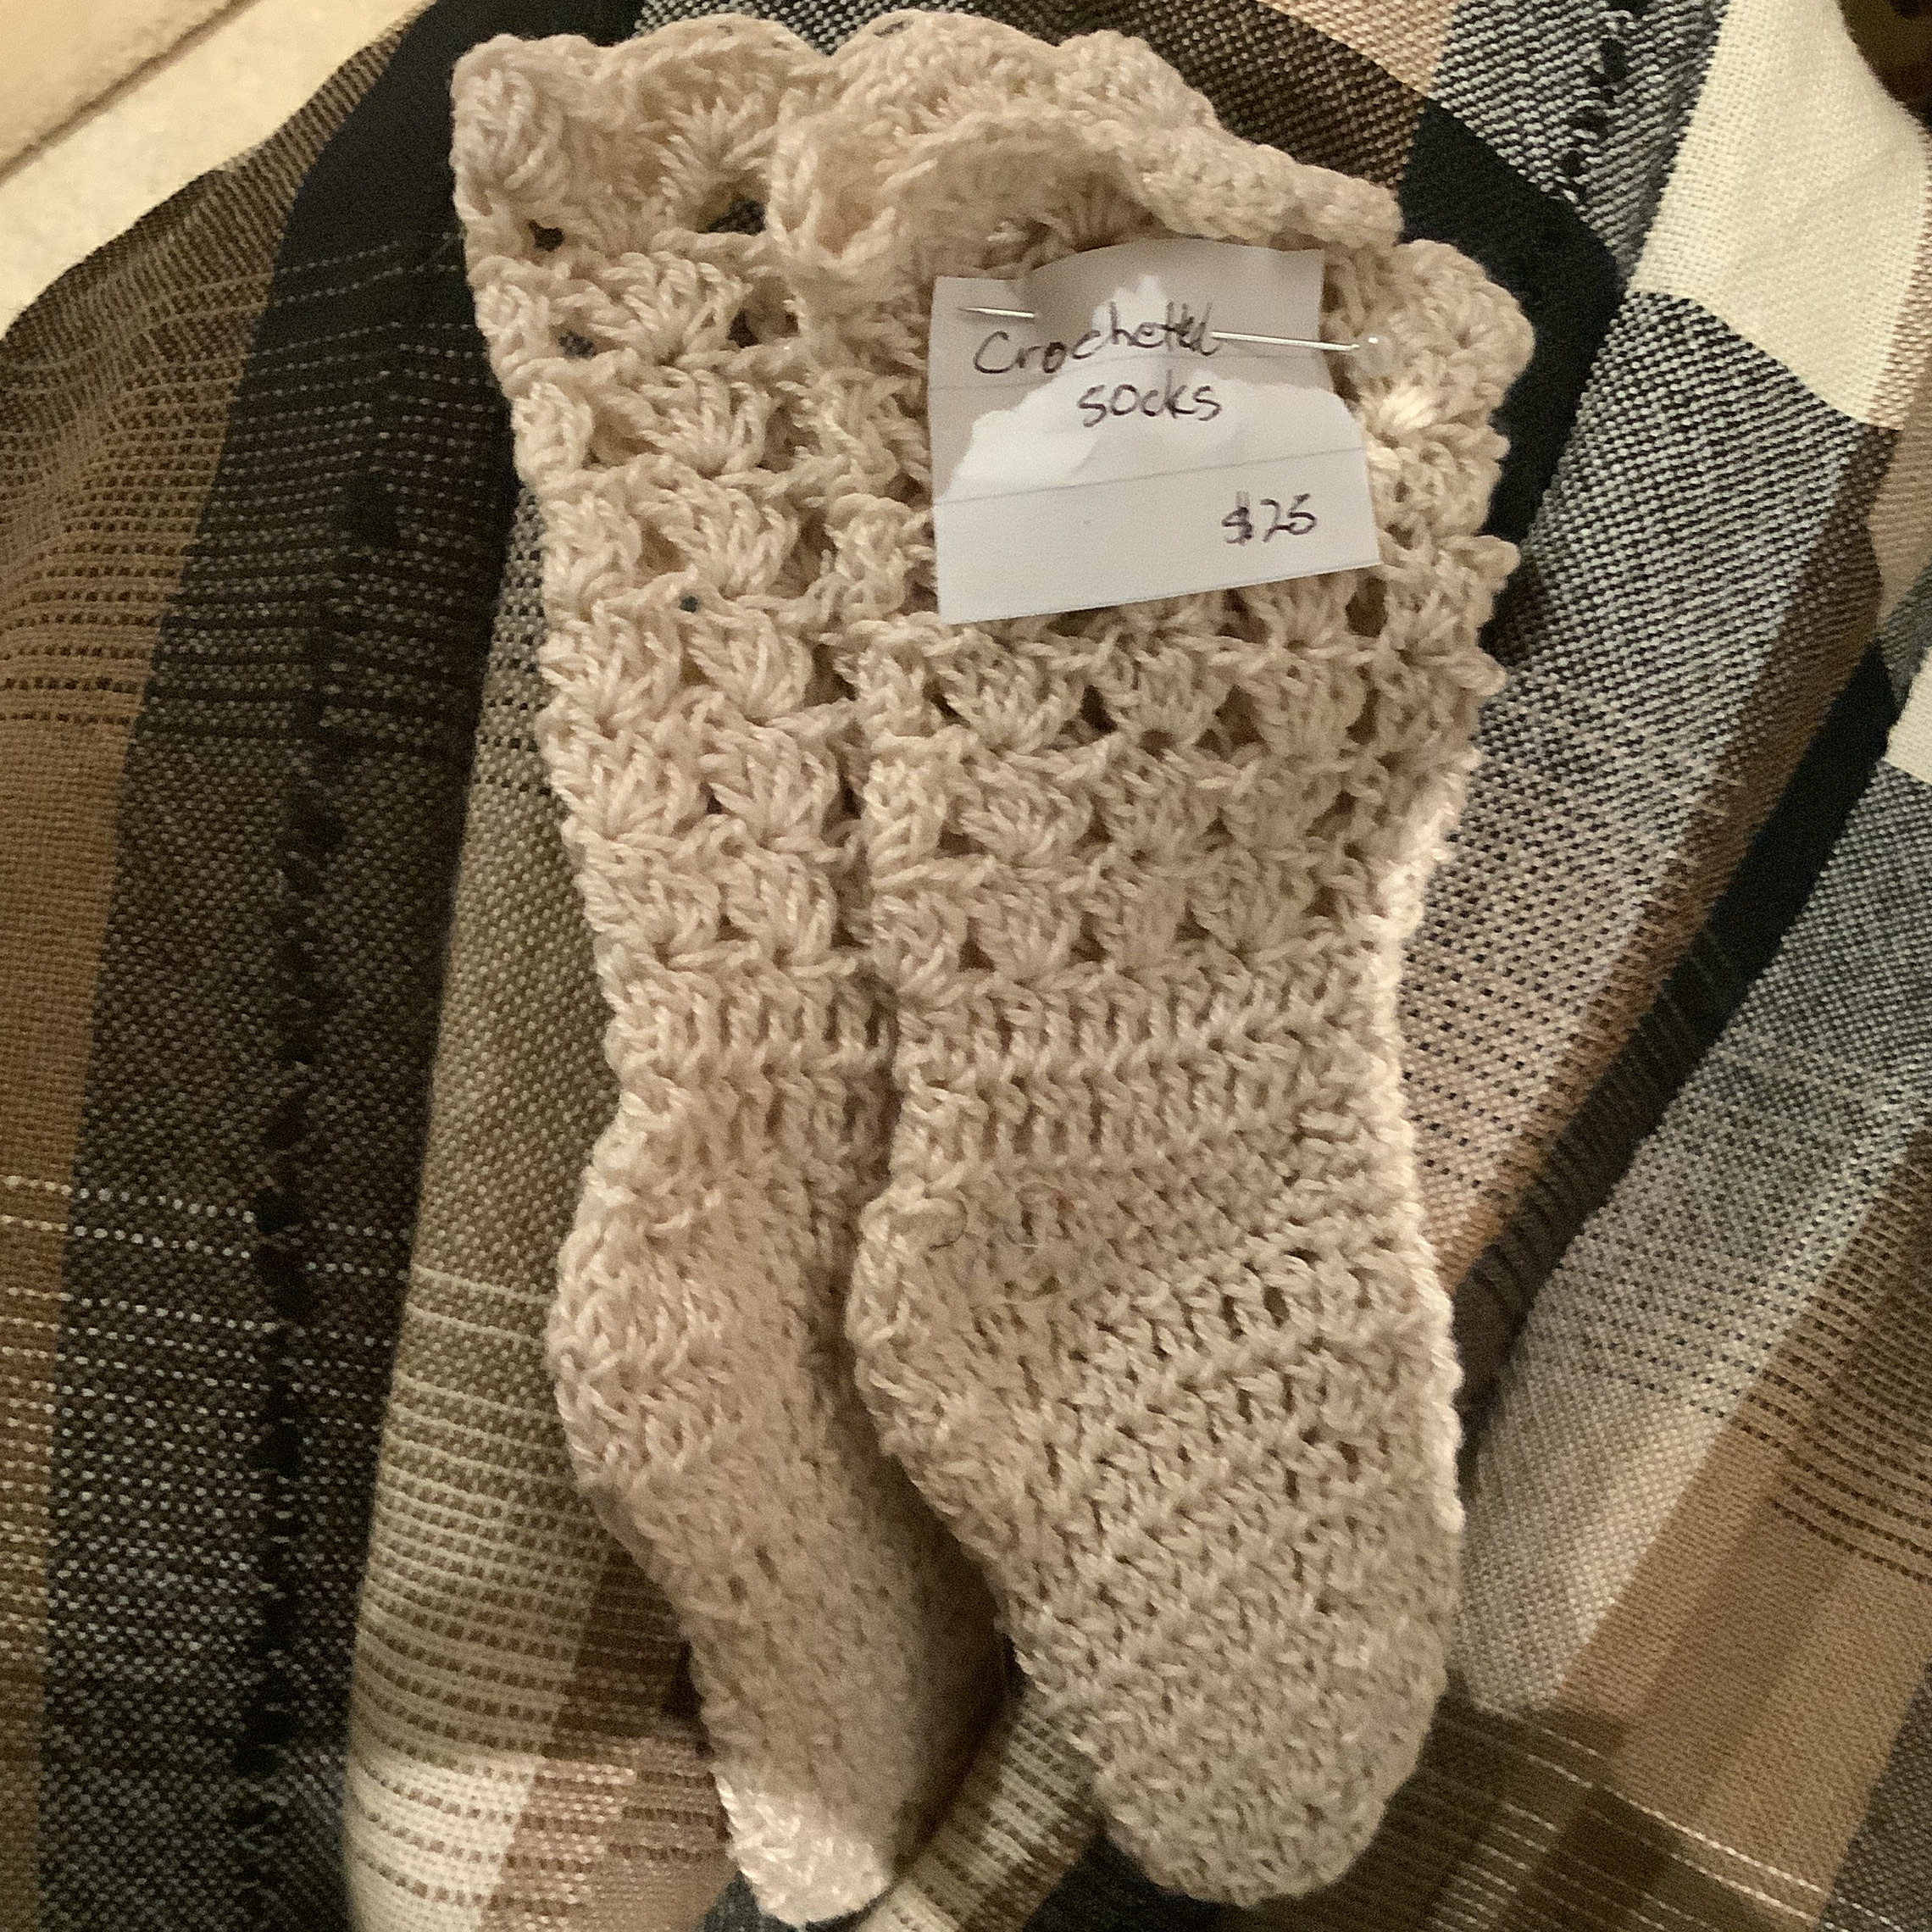 Fancy off-white crocheted socks with scalloped pattern